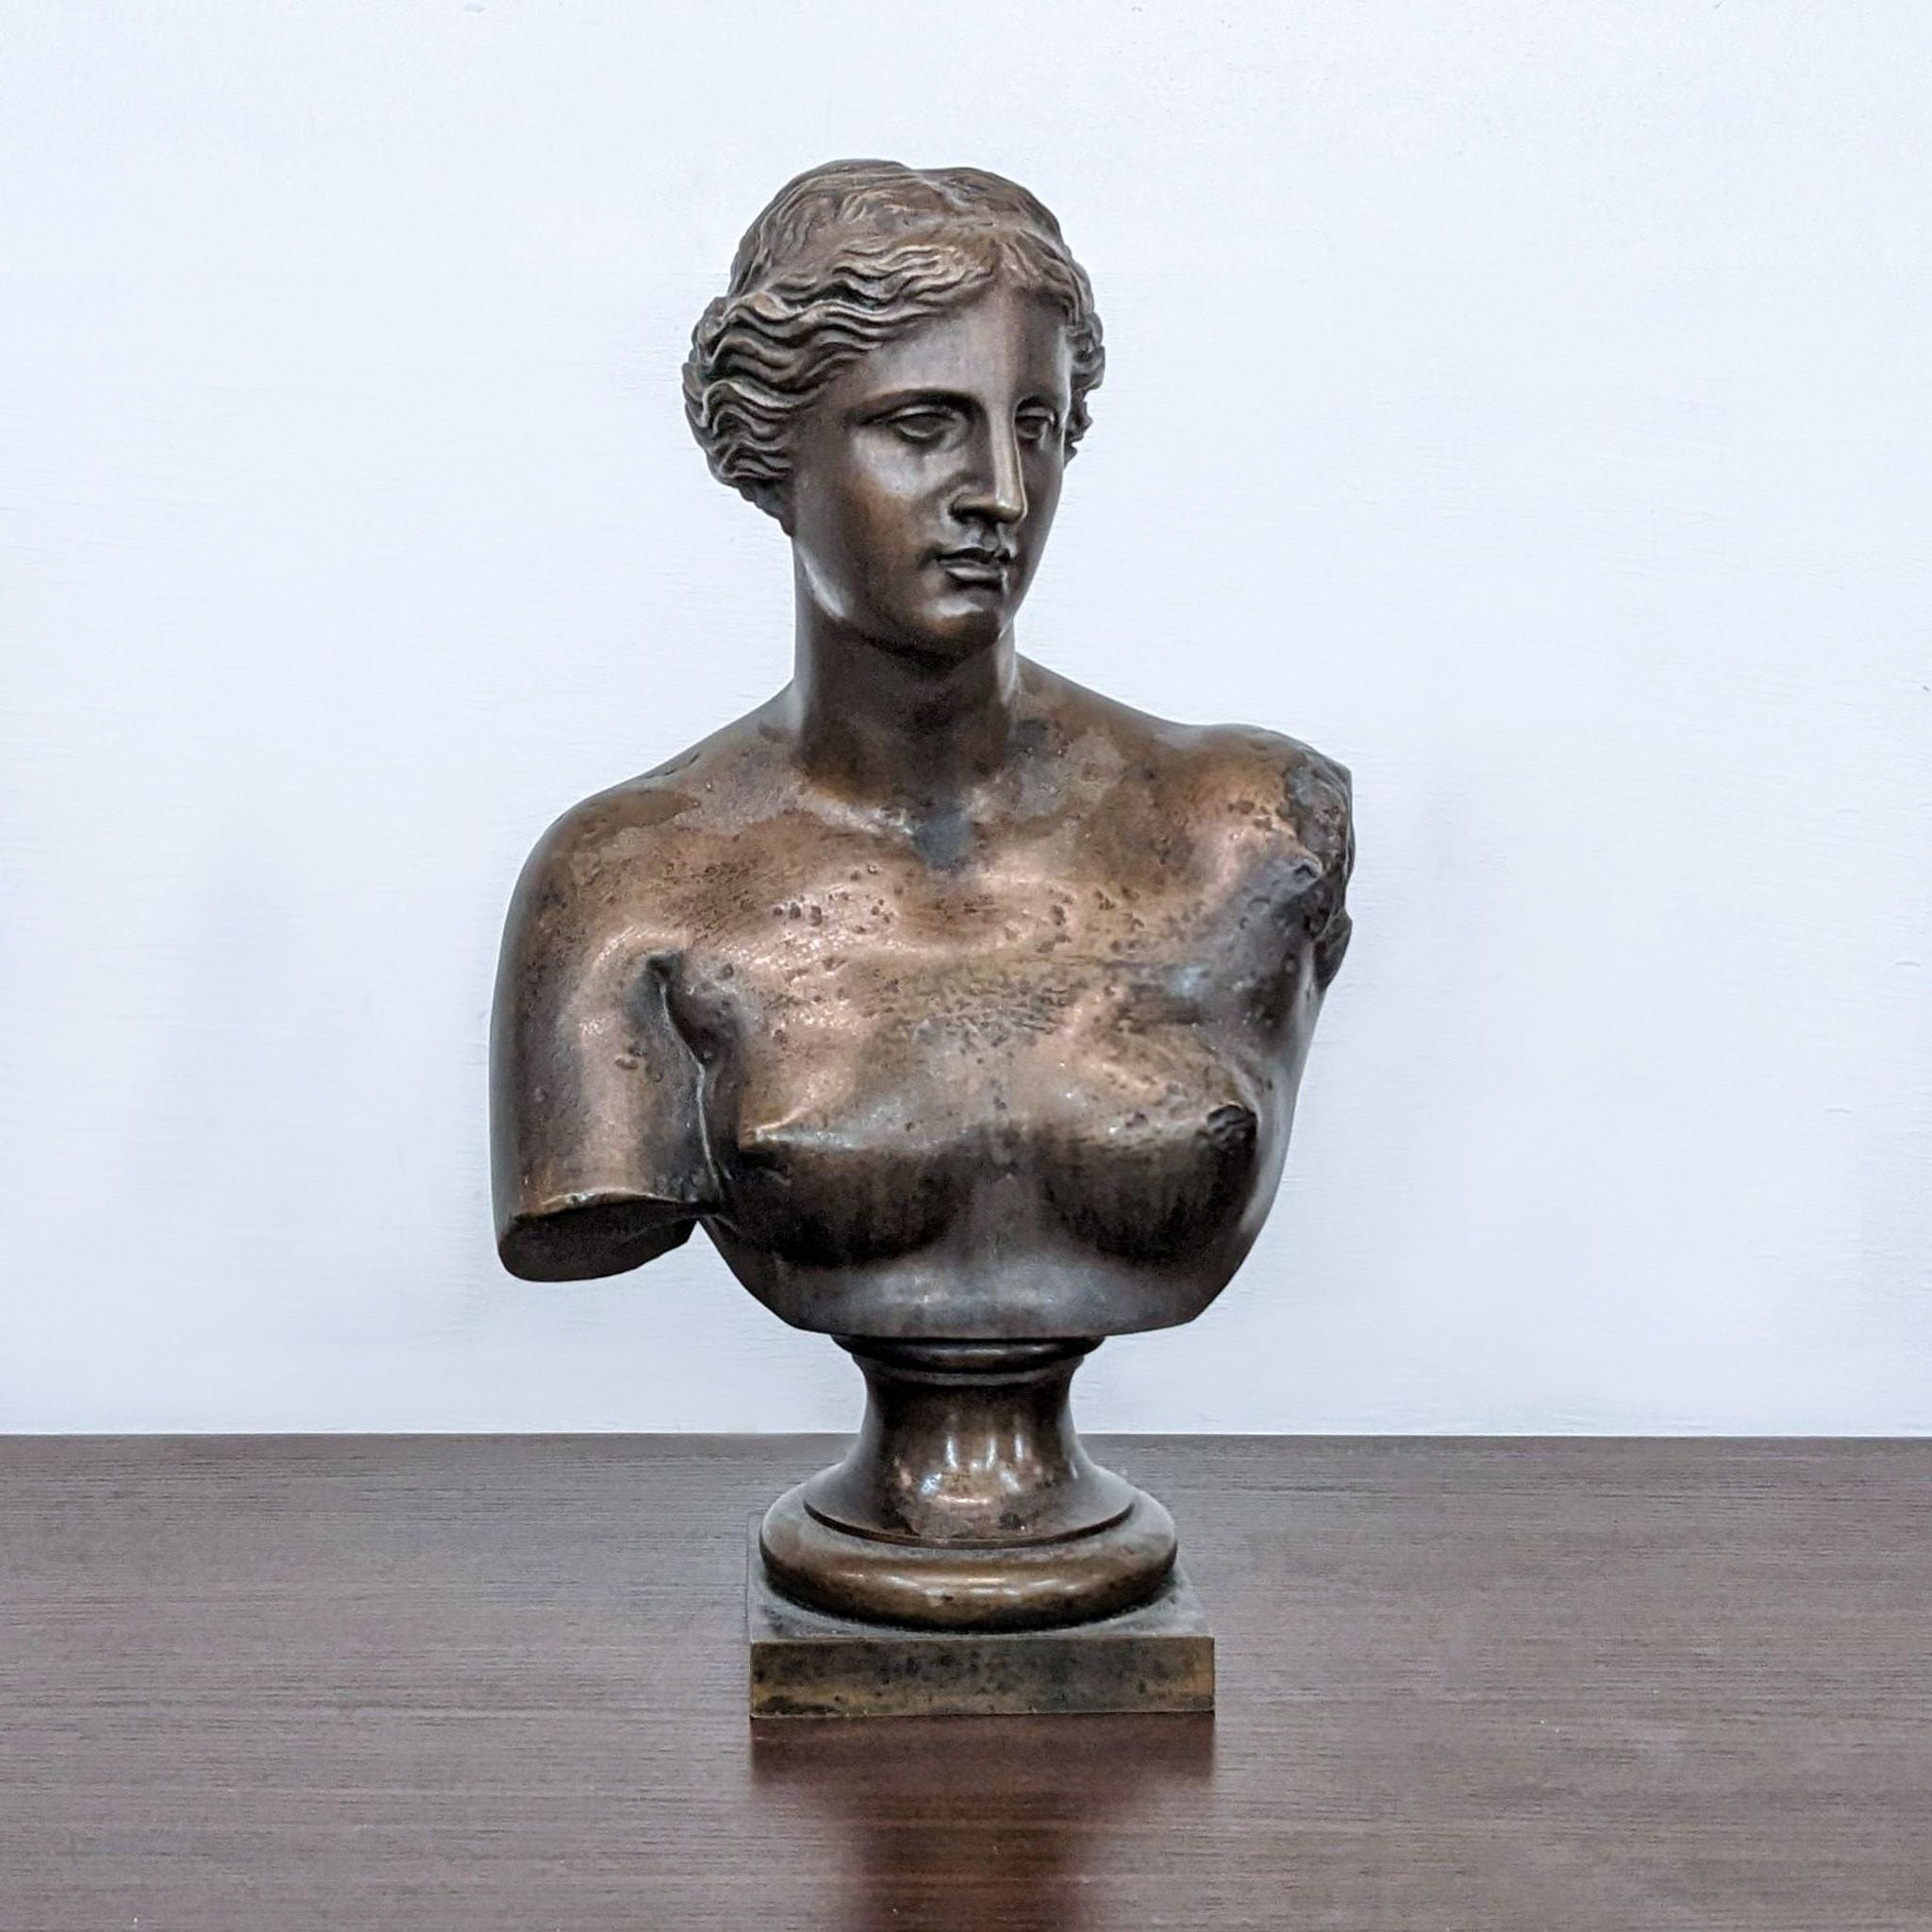 Bronze bust of Venus by Reperch, showing detailed features and upper torso, displayed on a wooden table.